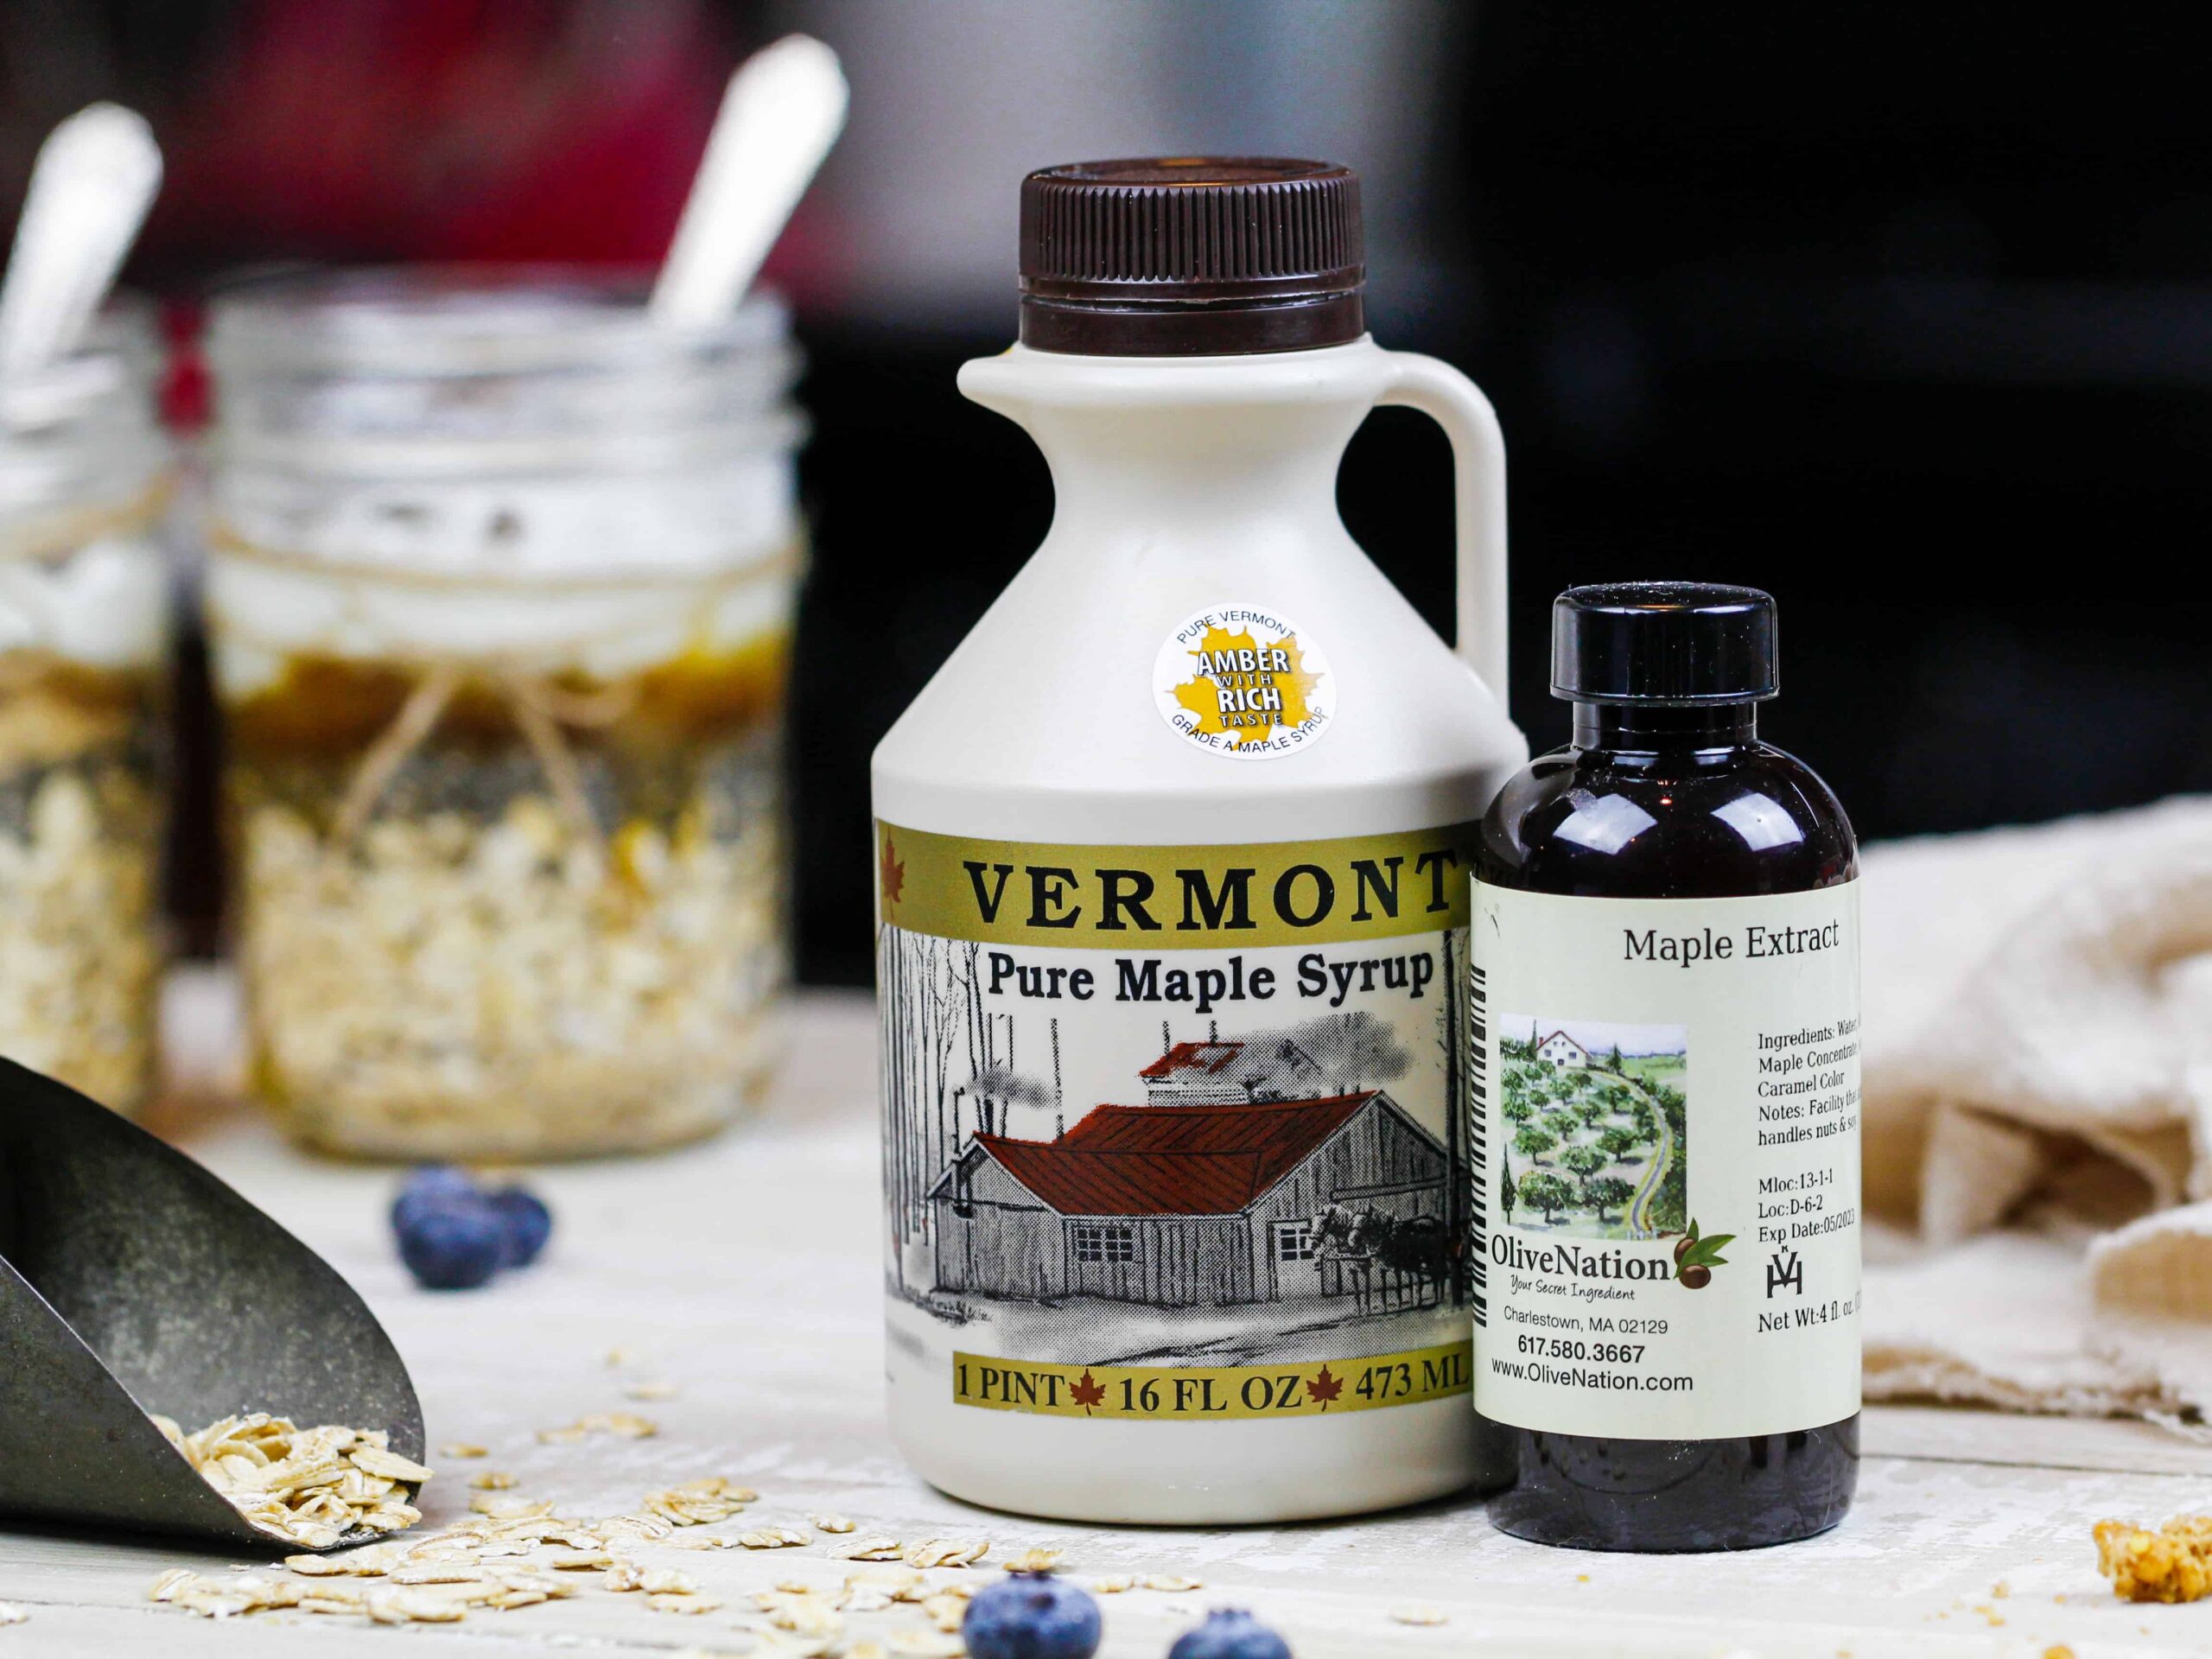 image of maple syrup from vermont and maple extract.